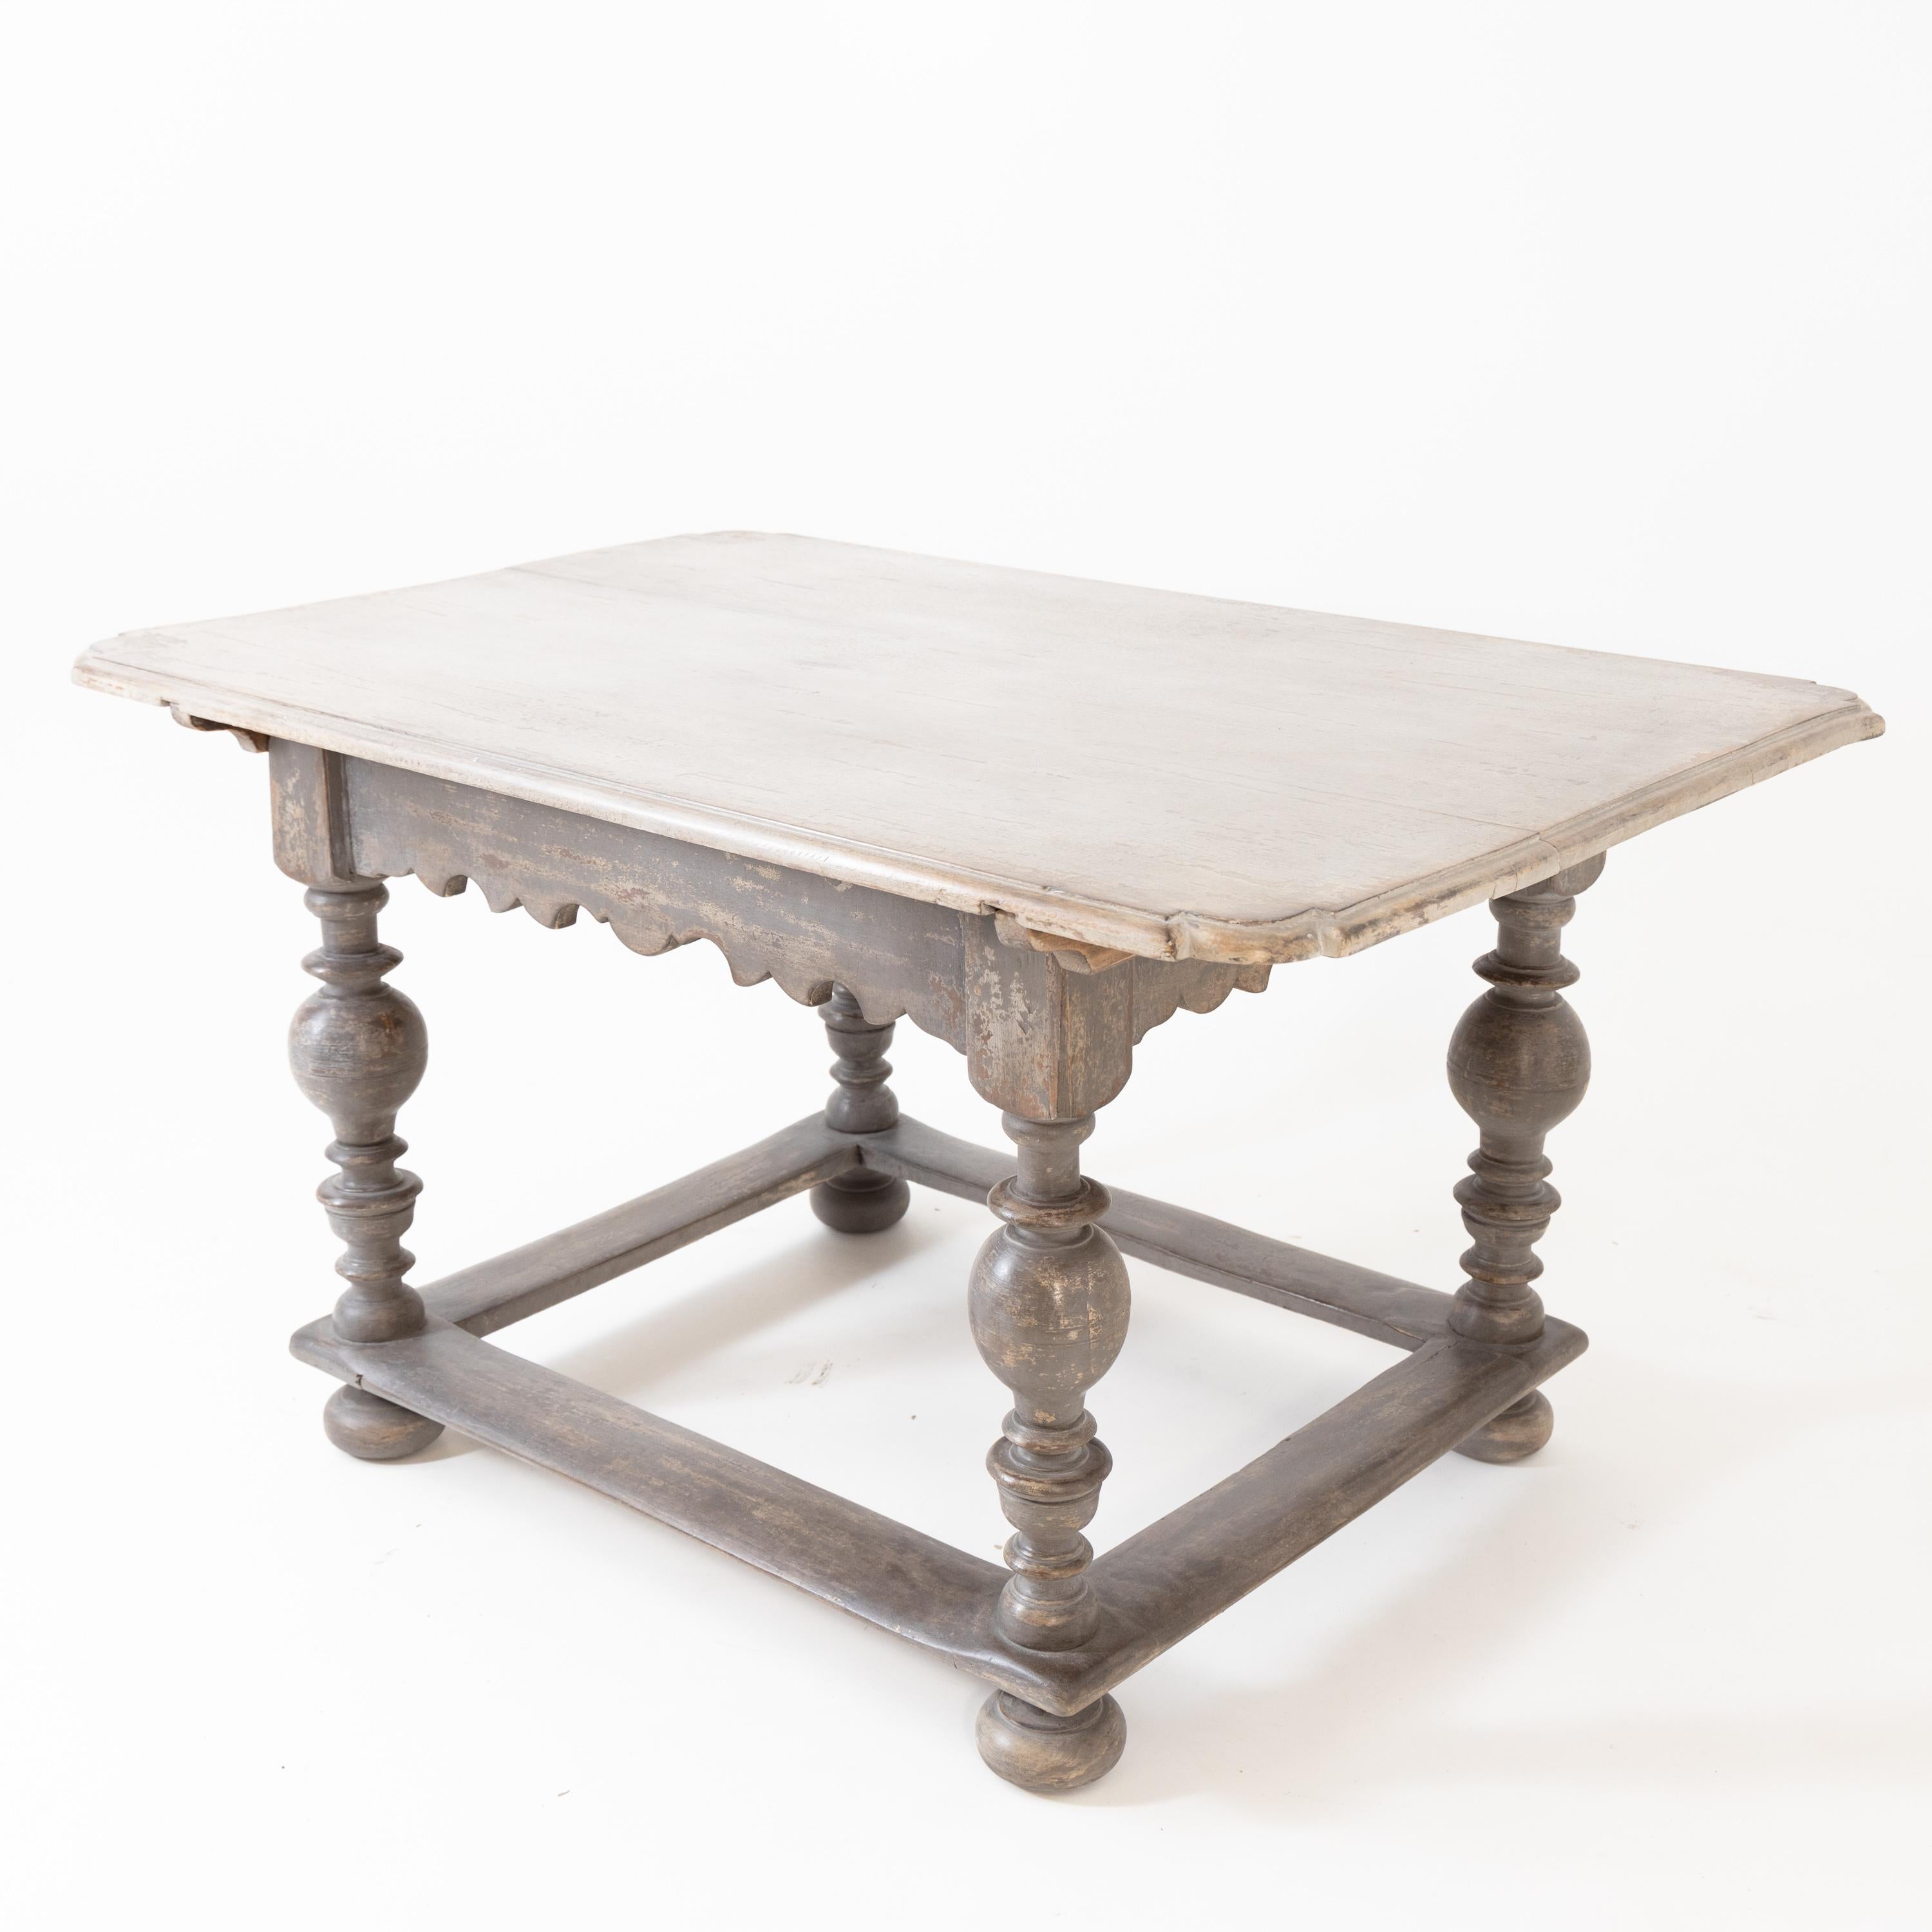 Baroque table on baluster legs with curved frame and circumferential bracing. The gray frame is new and has been decoratively rubbed through.